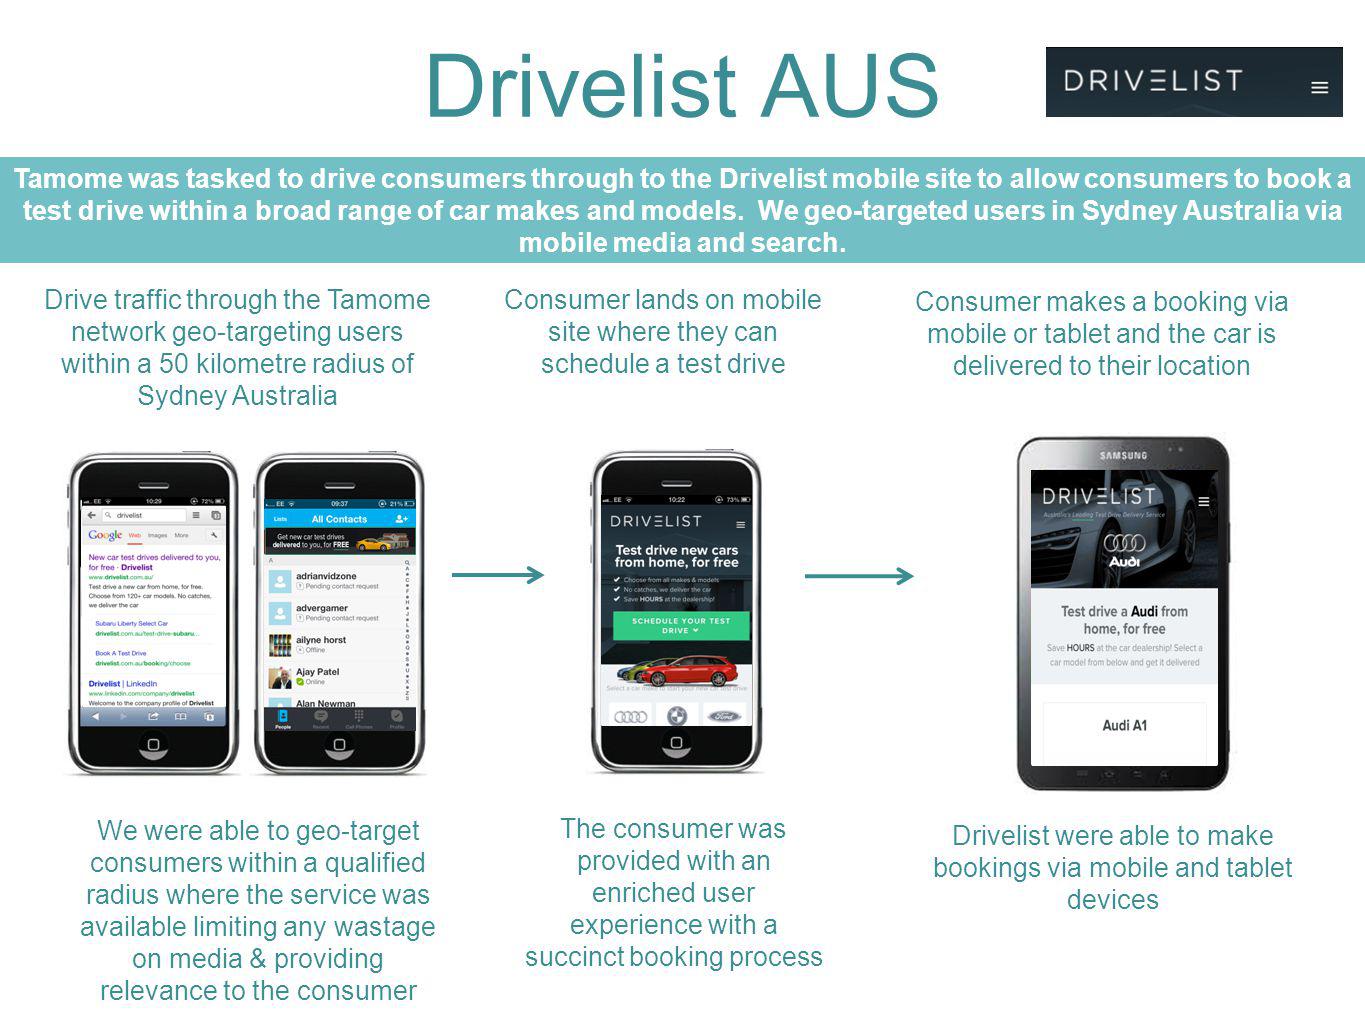 CONFIDENTIAL Drivelist AUS Drive traffic through the Tamome network geo-targeting users within a 50 kilometre radius of Sydney Australia Consumer lands on mobile site where they can schedule a test drive Consumer makes a booking via mobile or tablet and the car is delivered to their location Tamome was tasked to drive consumers through to the Drivelist mobile site to allow consumers to book a test drive within a broad range of car makes and models.